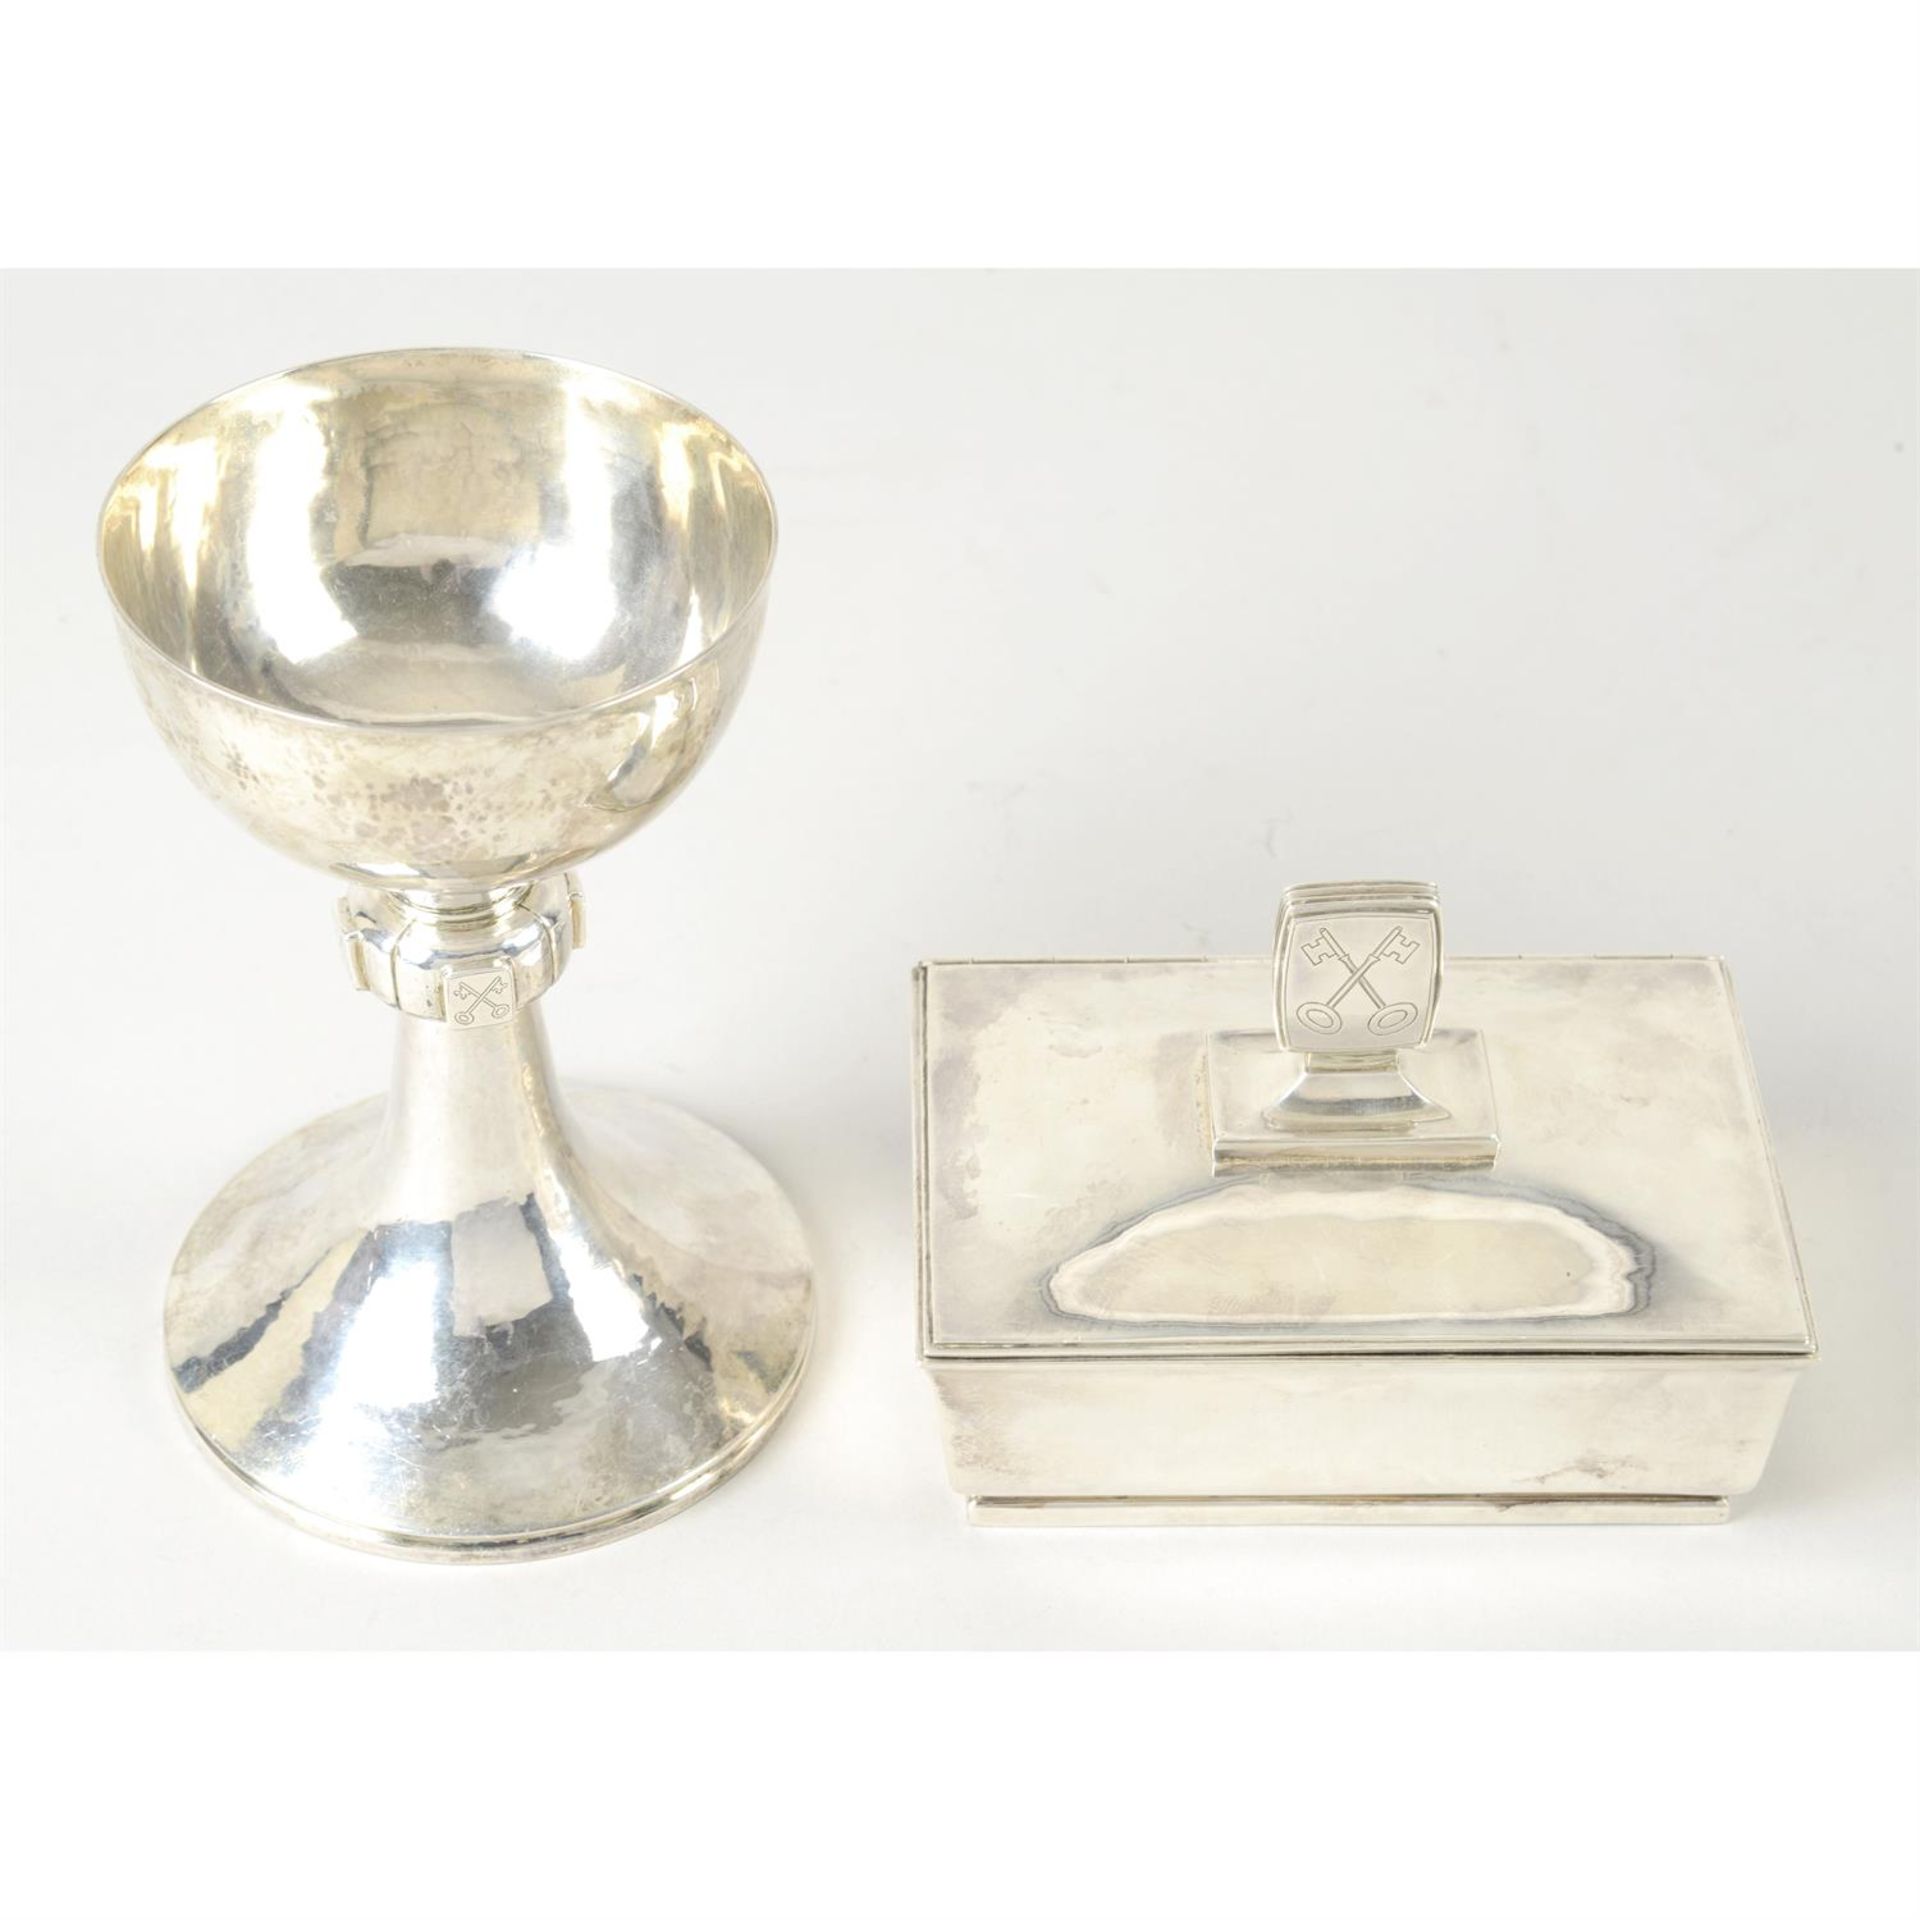 St. Peter's Church, Birmingham, a mid-20th century silver chalice & wafer box.